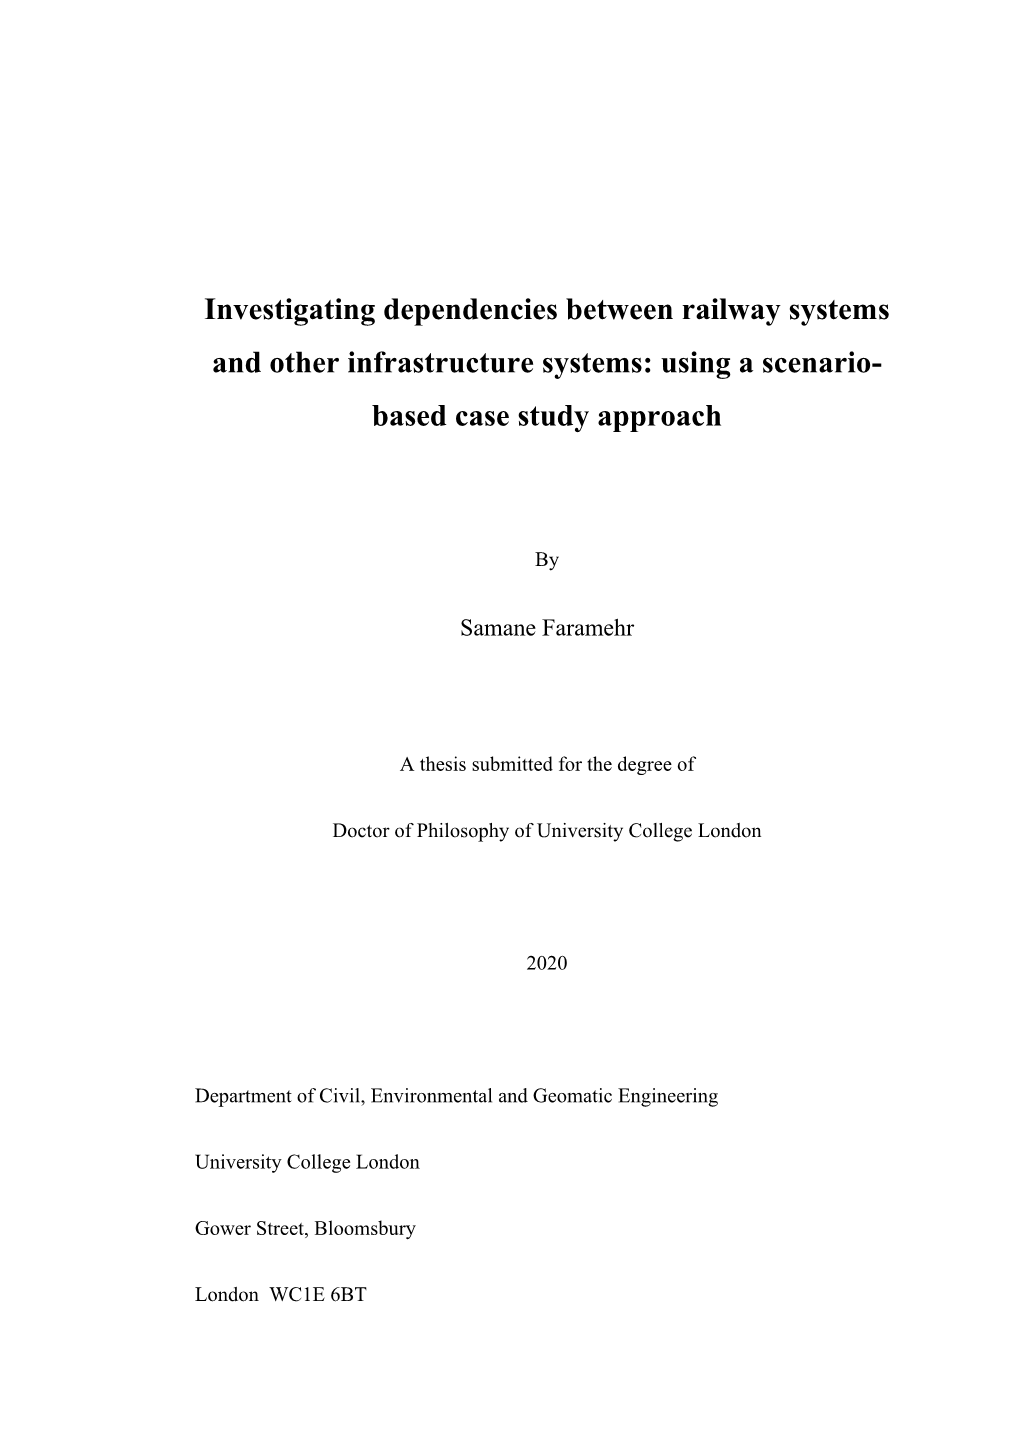 Investigating Dependencies Between Railway Systems and Other Infrastructure Systems: Using a Scenario- Based Case Study Approach